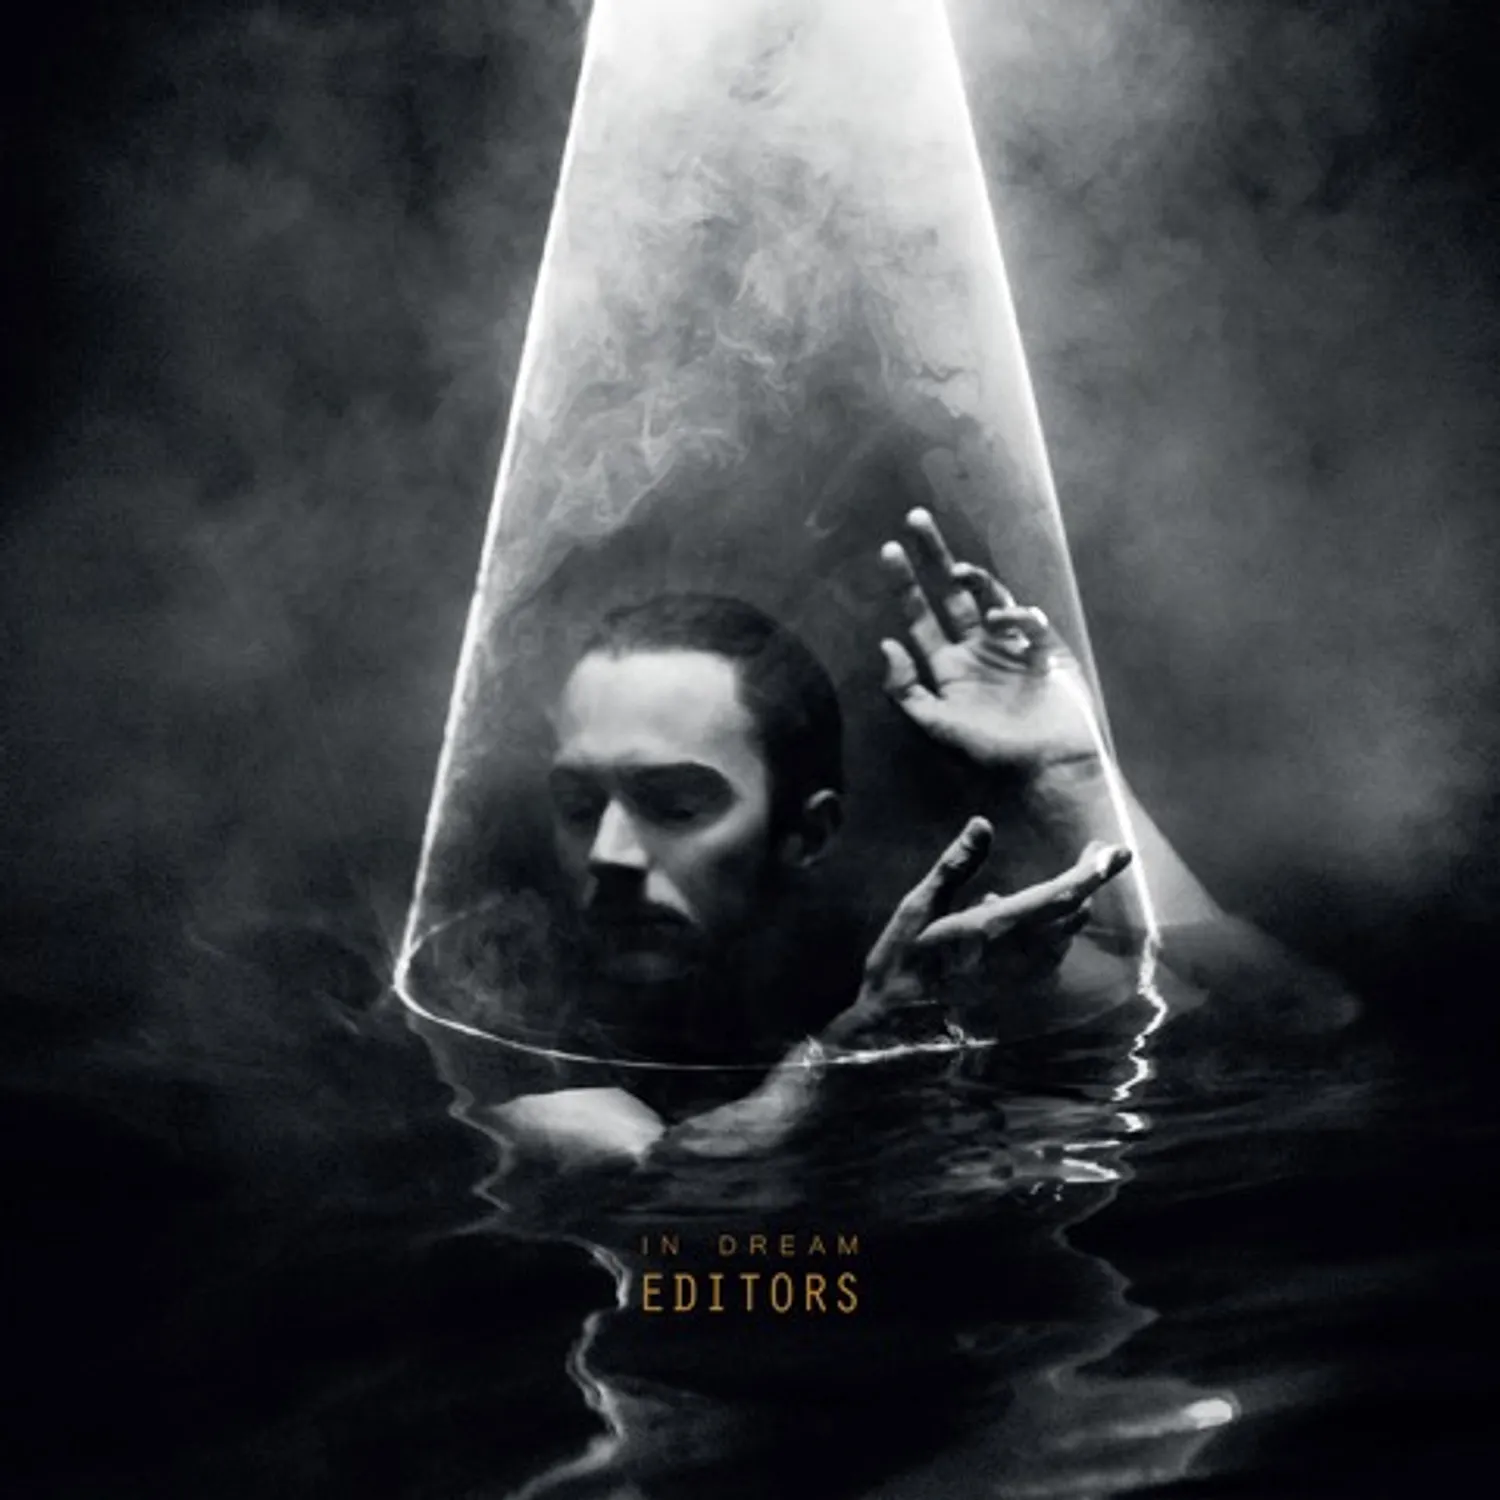 In Dream (Clear Vinyl) by Editors